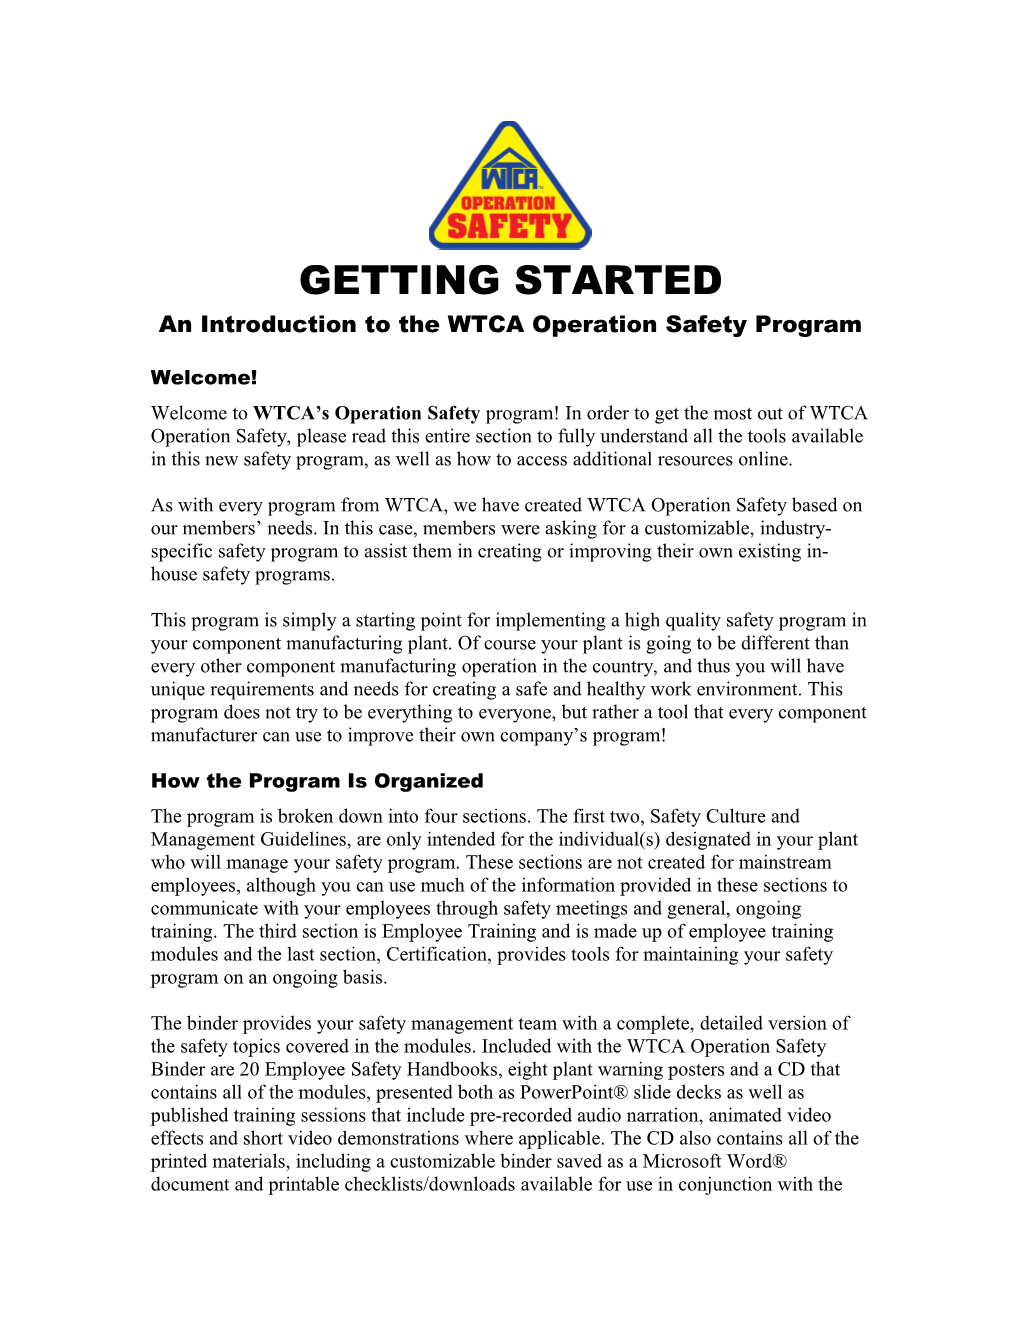 We Are Pleased to Announce WTCA Operations Safety Certification (OSC)